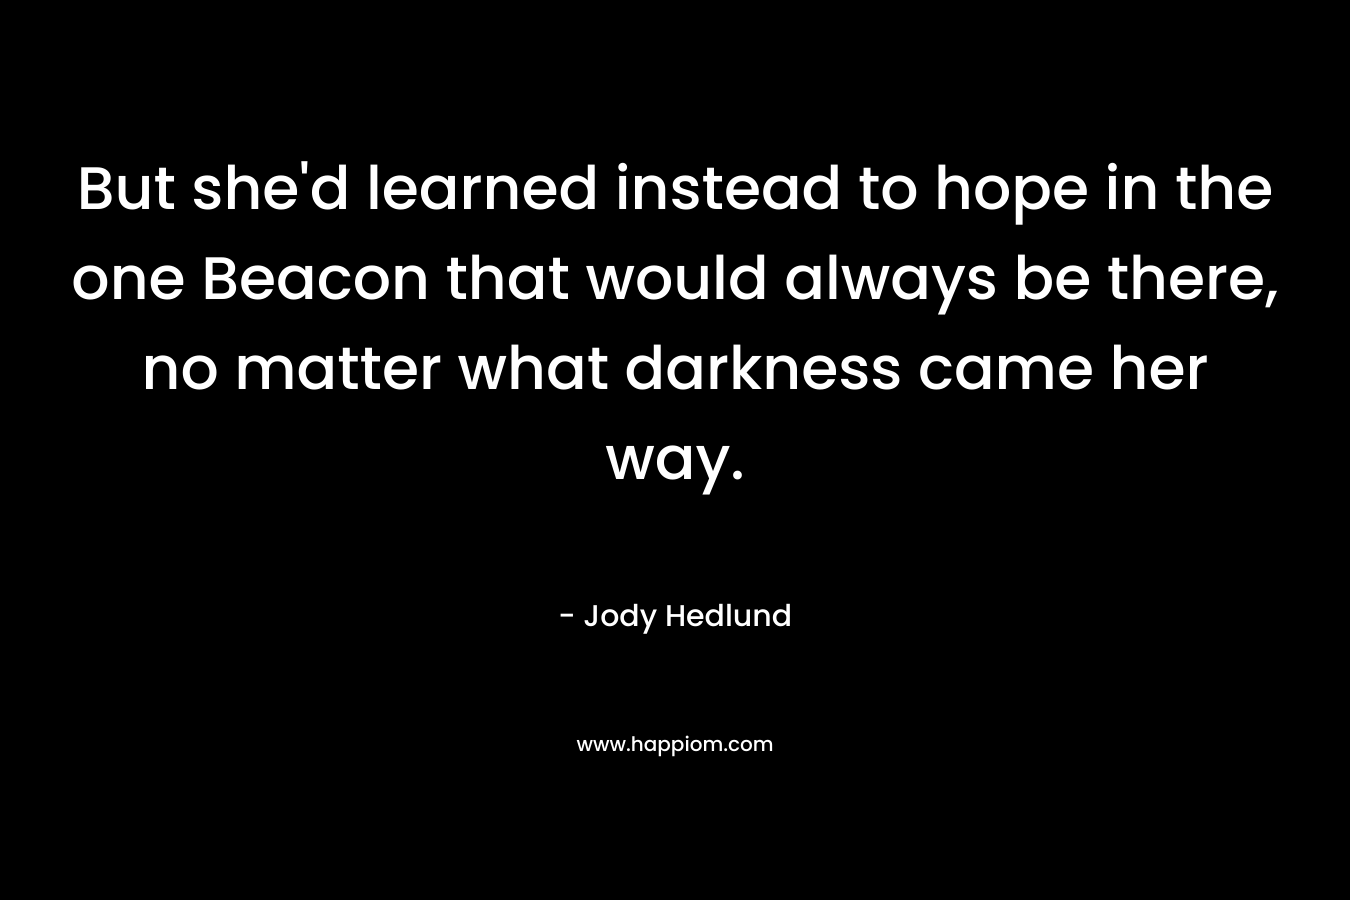 But she’d learned instead to hope in the one Beacon that would always be there, no matter what darkness came her way. – Jody Hedlund